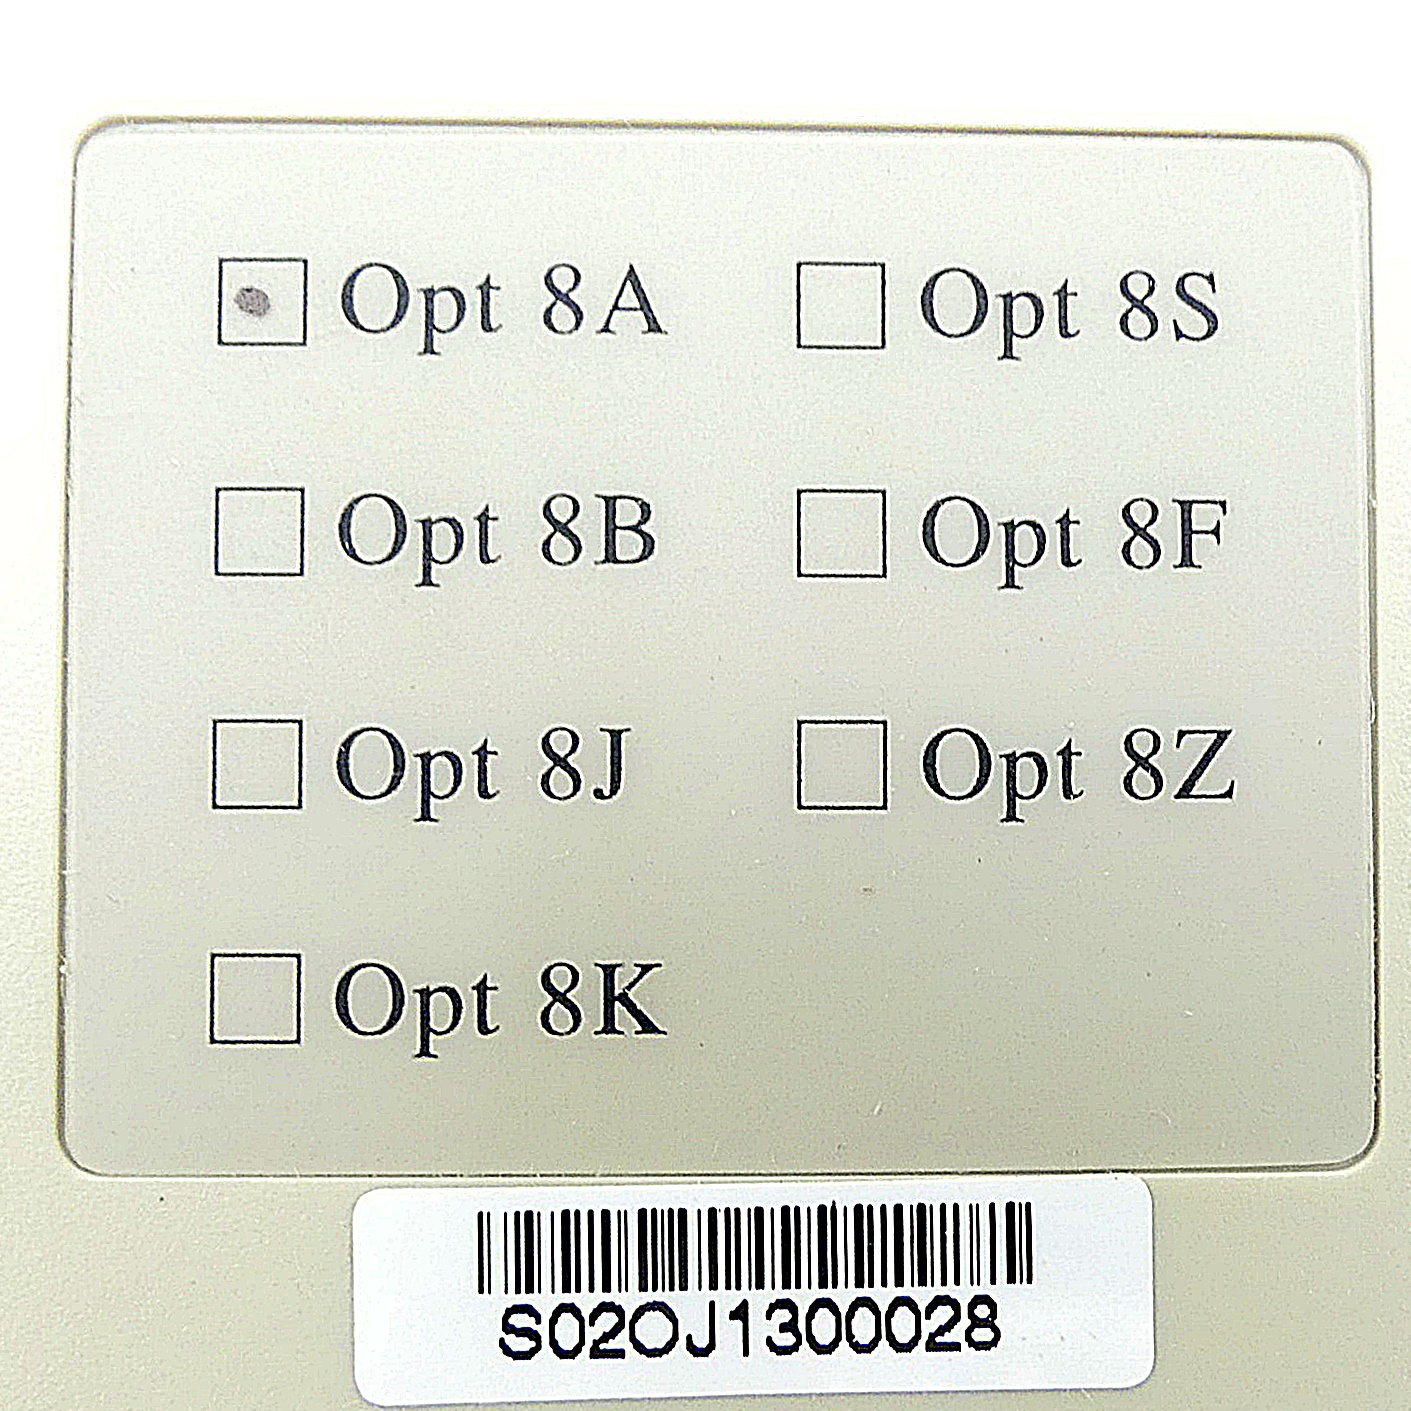 Connection box Opt8A 